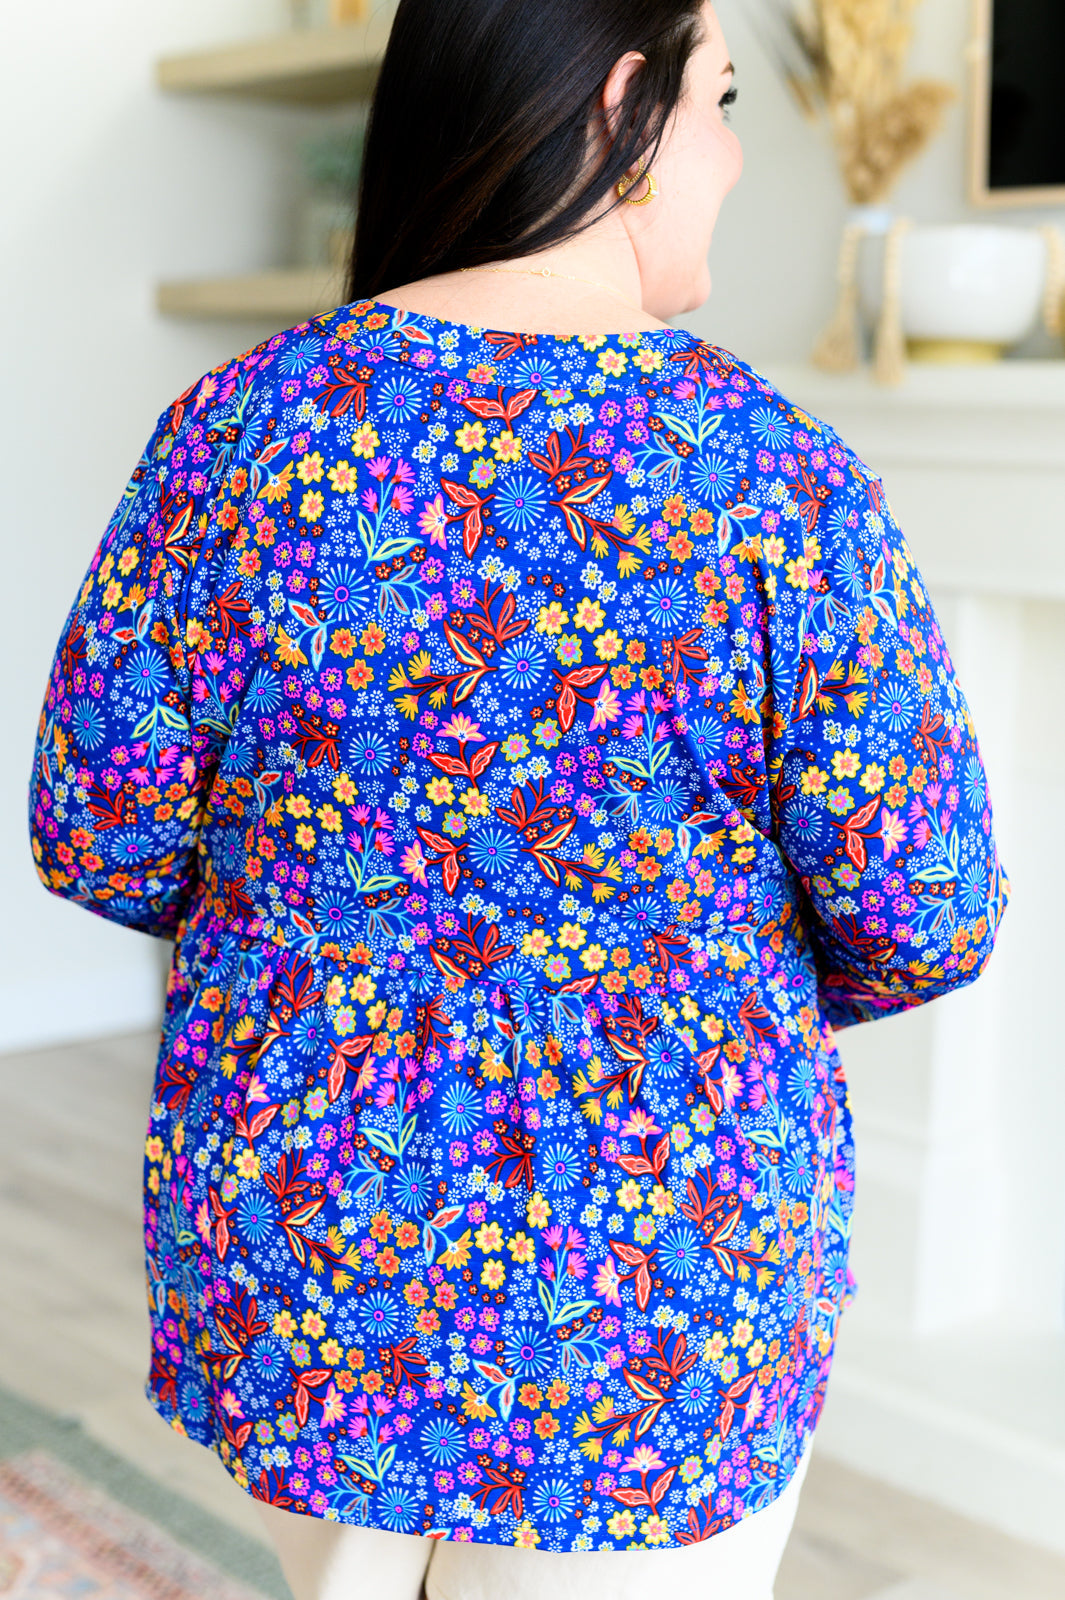 Lizzy Babydoll Top in Royal Retro Floral Tops Ave Shops   